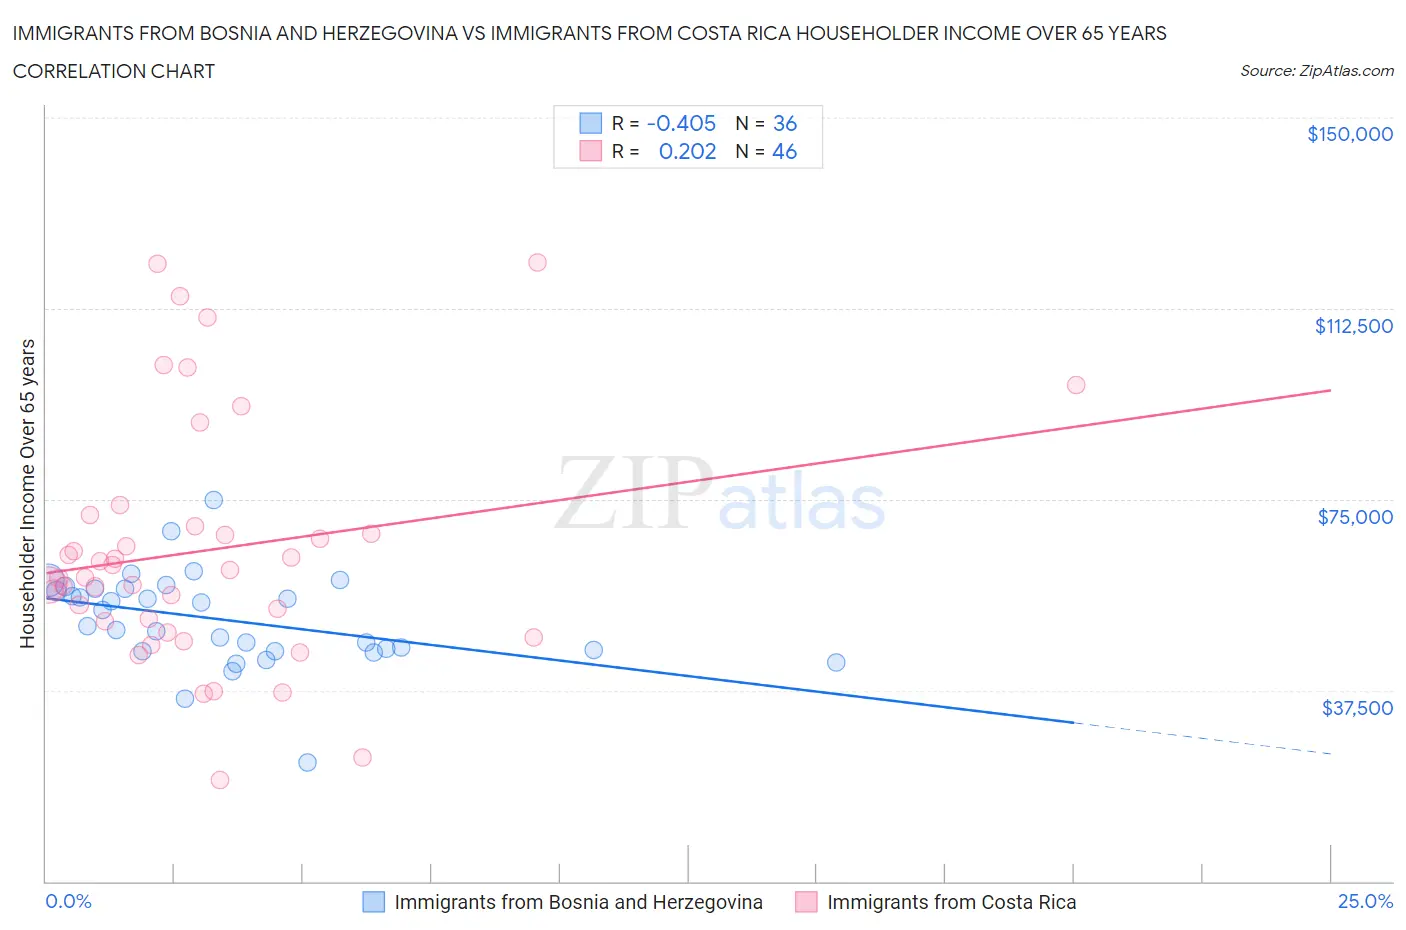 Immigrants from Bosnia and Herzegovina vs Immigrants from Costa Rica Householder Income Over 65 years